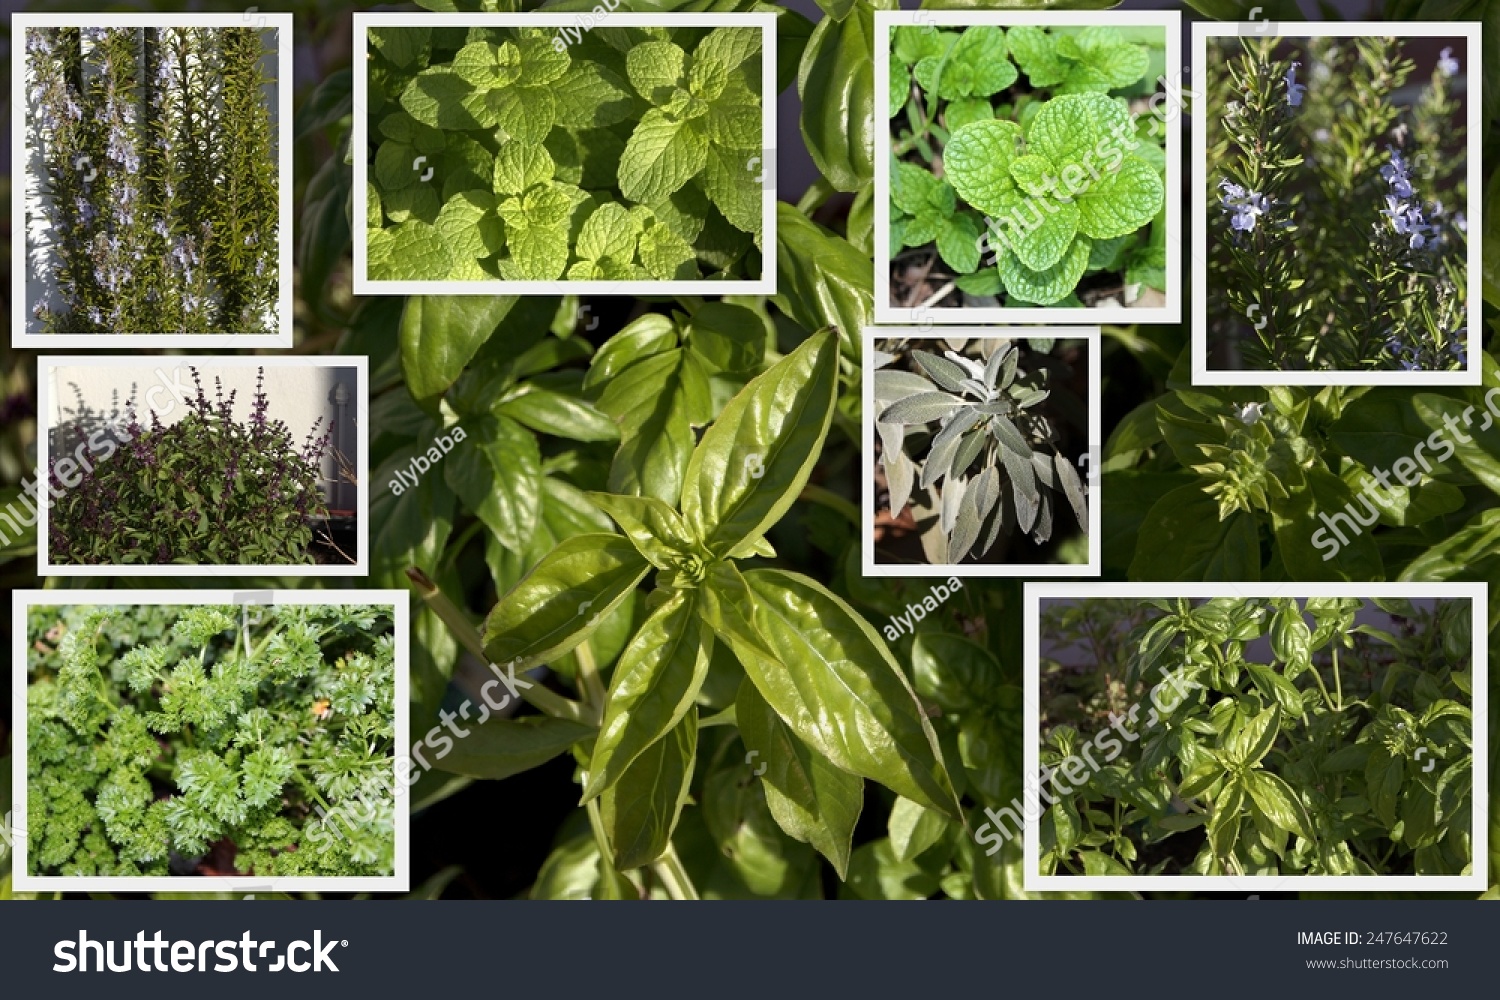 What are some commonly used herbs?